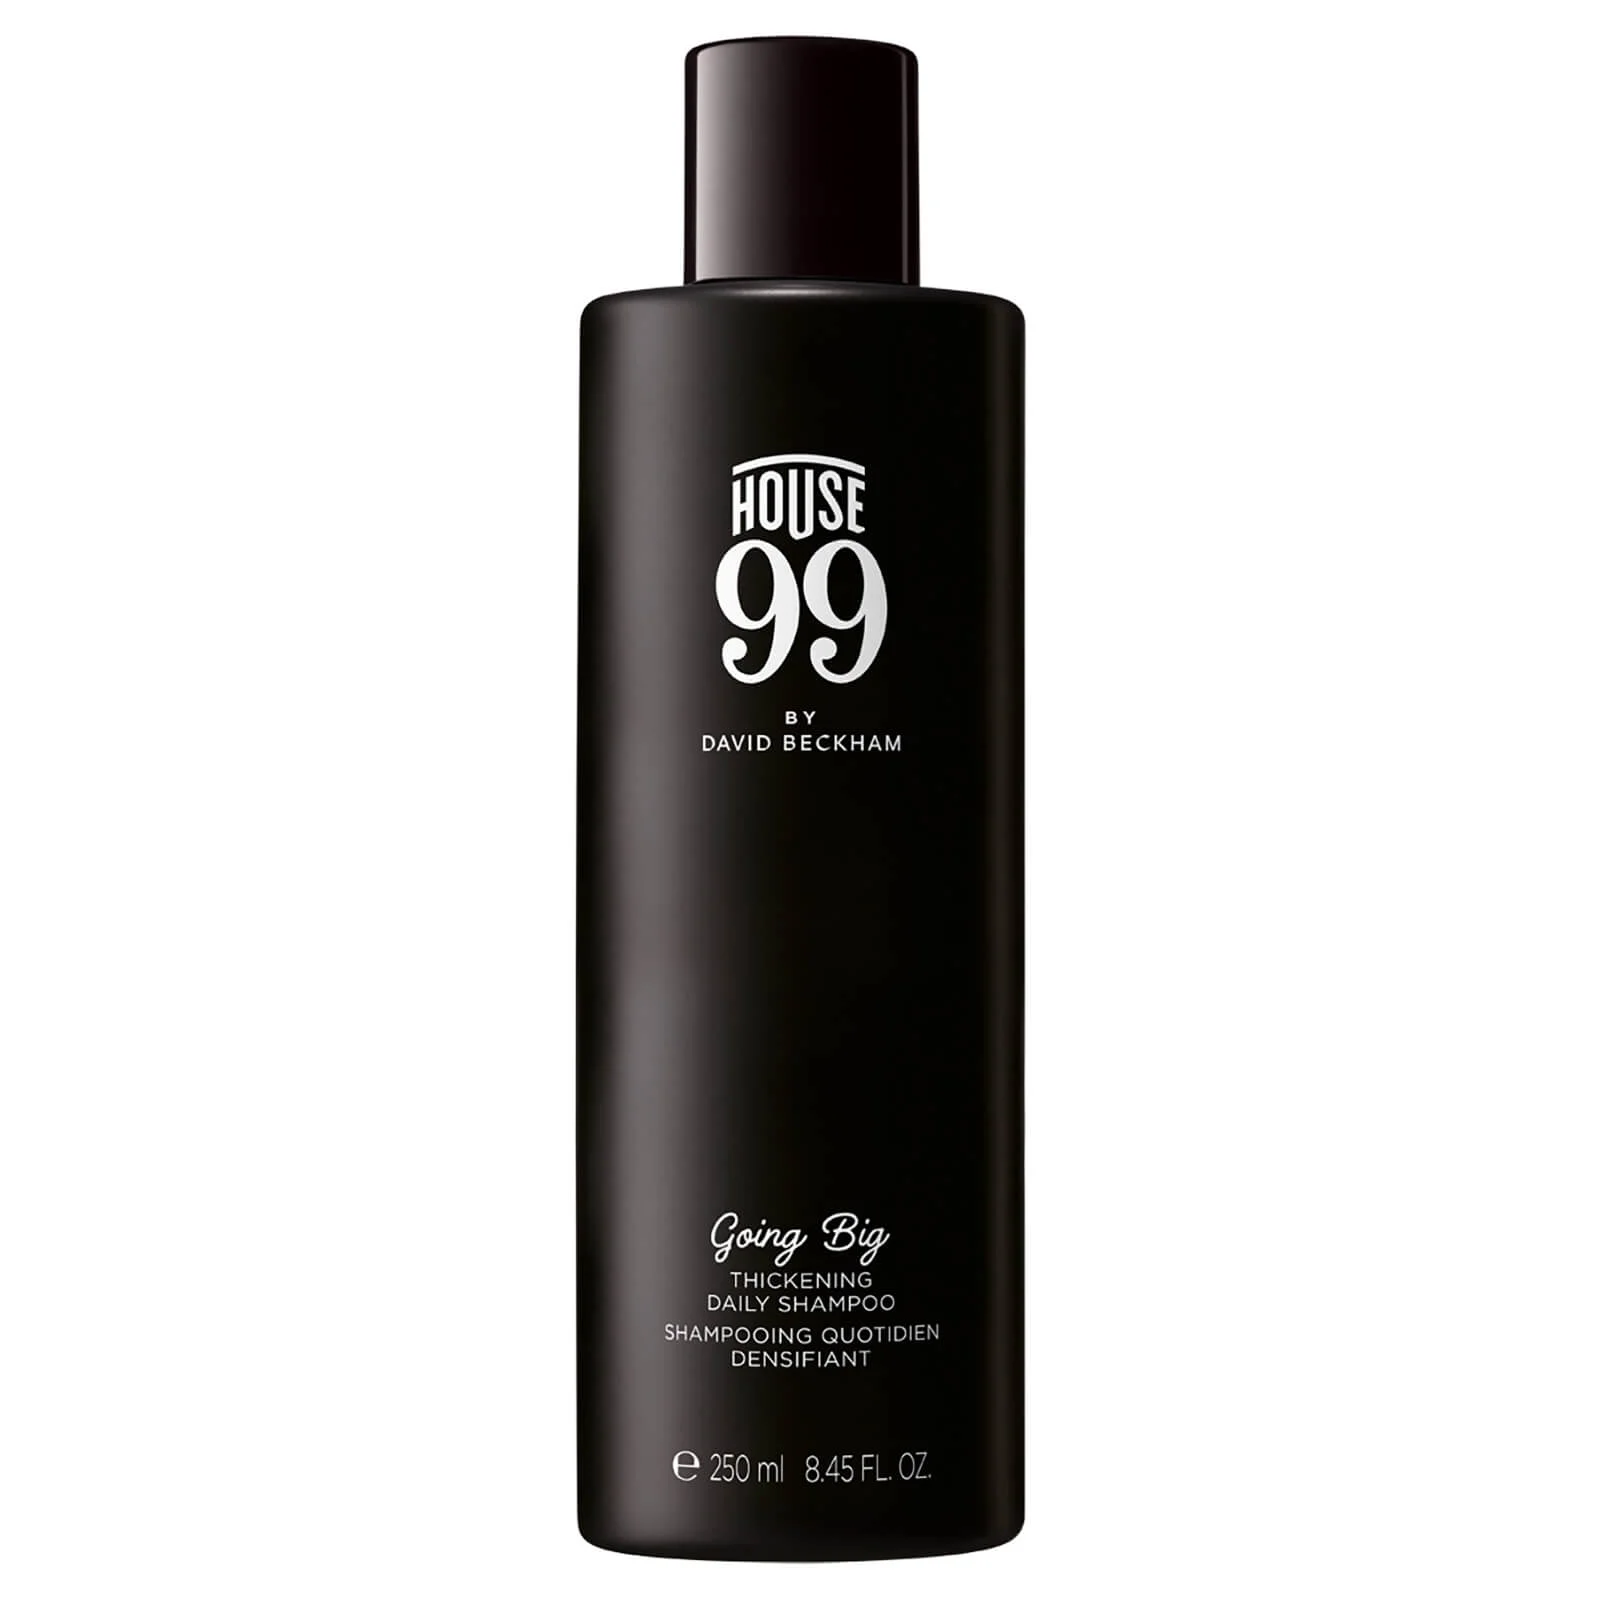 House 99 Going Big Thickening Daily Shampoo 250ml Image 1